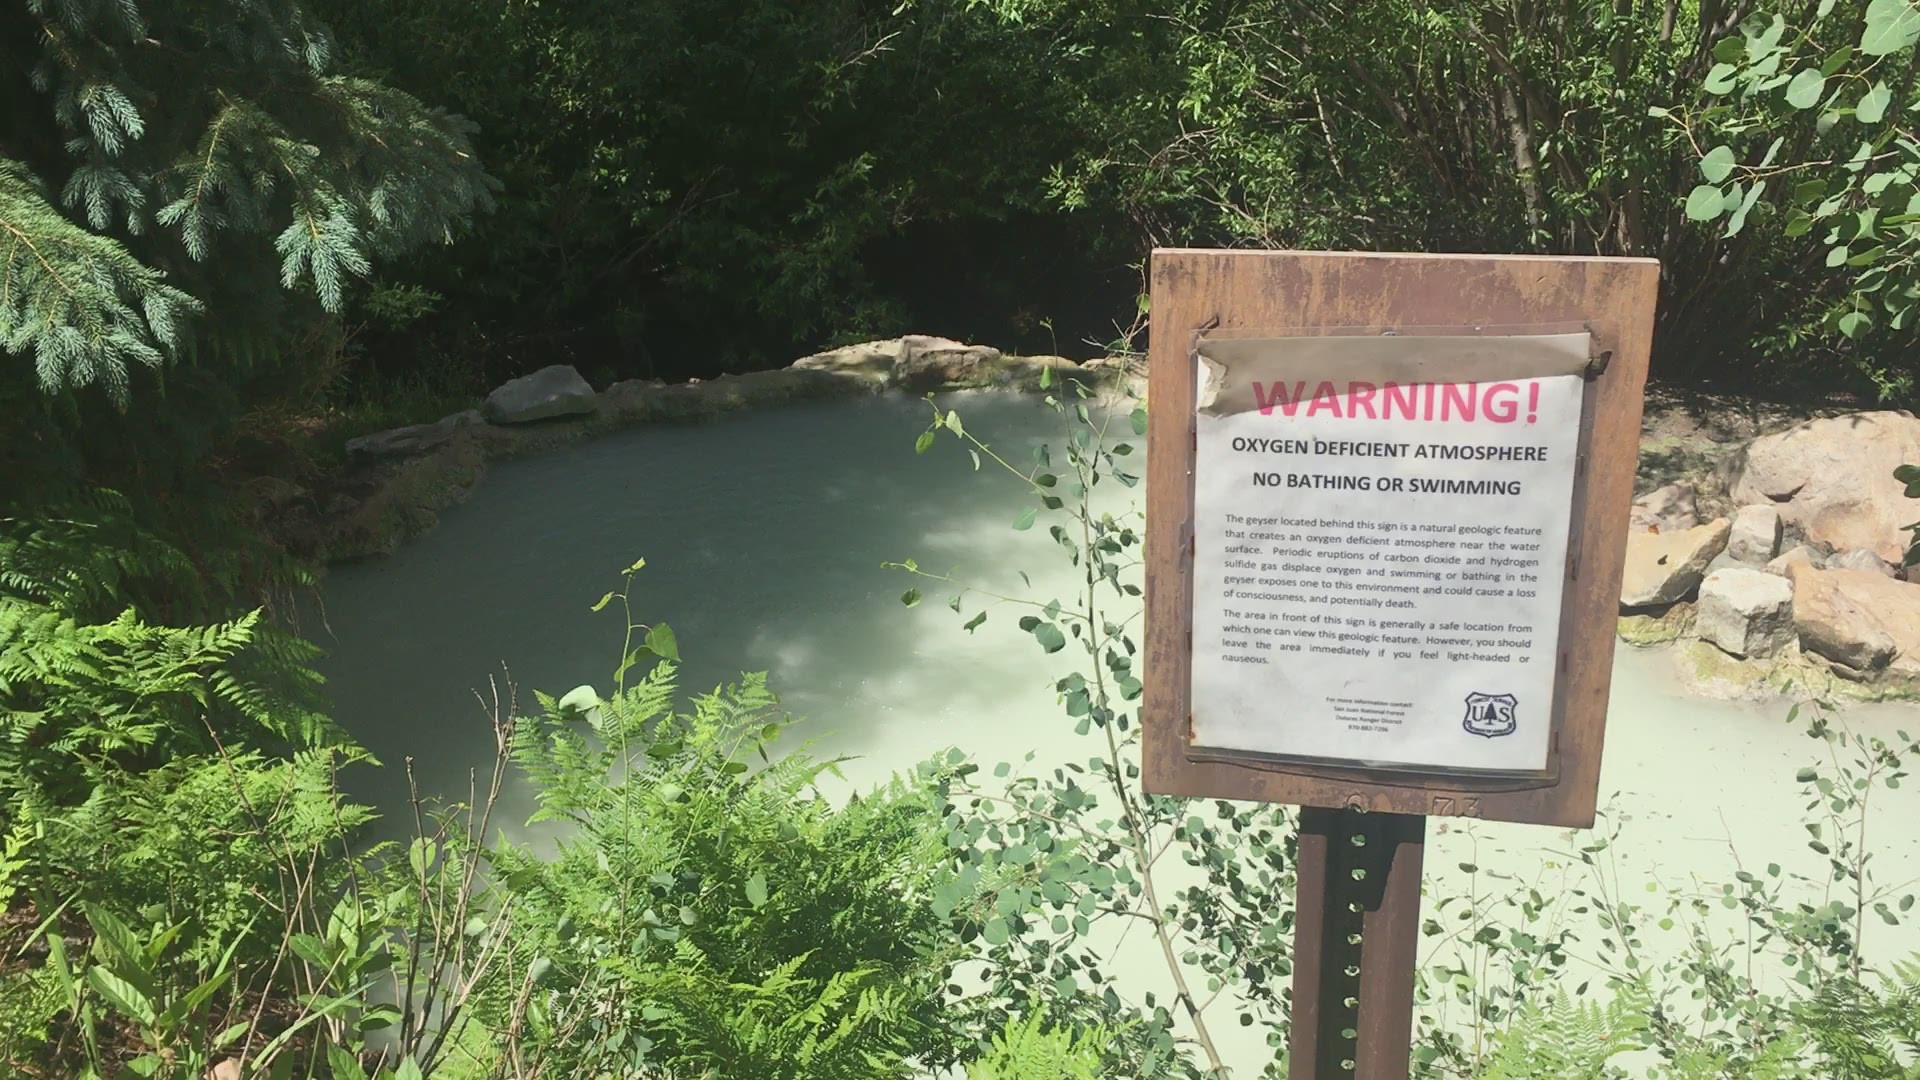 Geyser Spring in southwestern Colorado comes with a warning. Visitors should stay back and should avoid staying too long due to carbon monoxide and hydrogen sulfide gas that can come from the geyser.